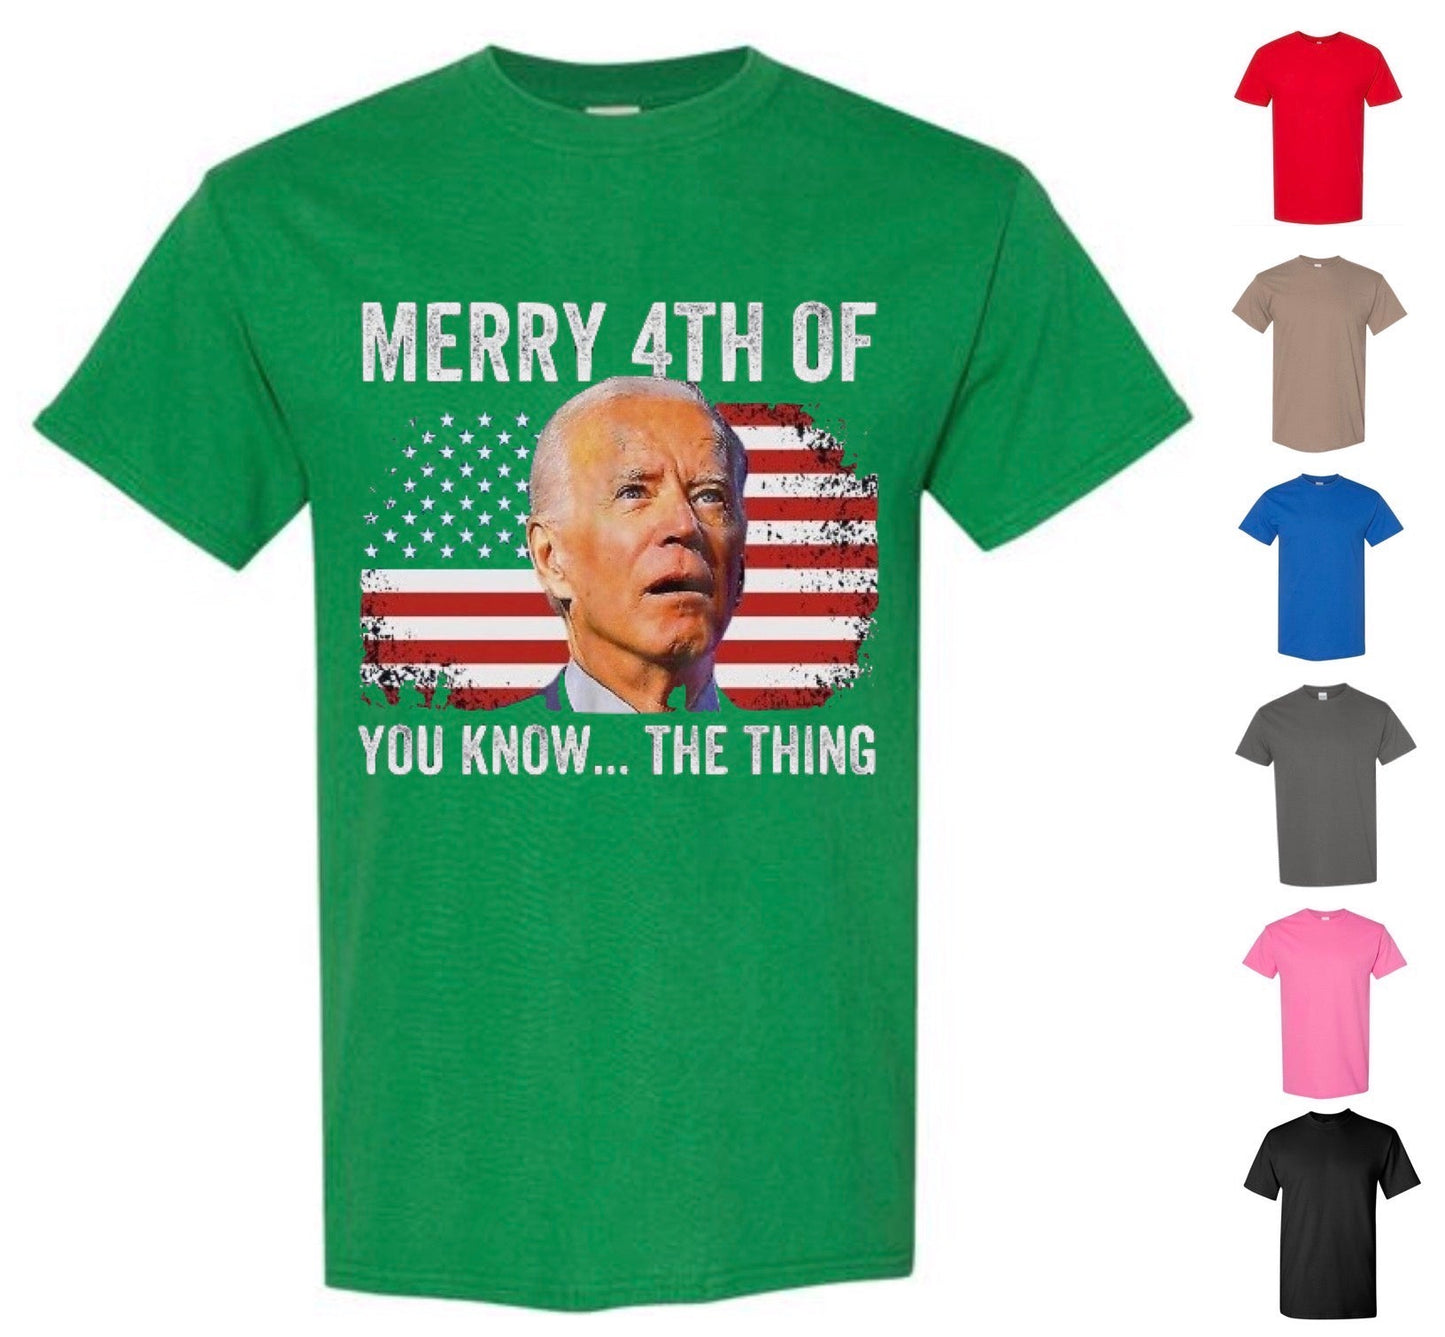 Merry 4th of You Know The Thing! (Free Shipping)